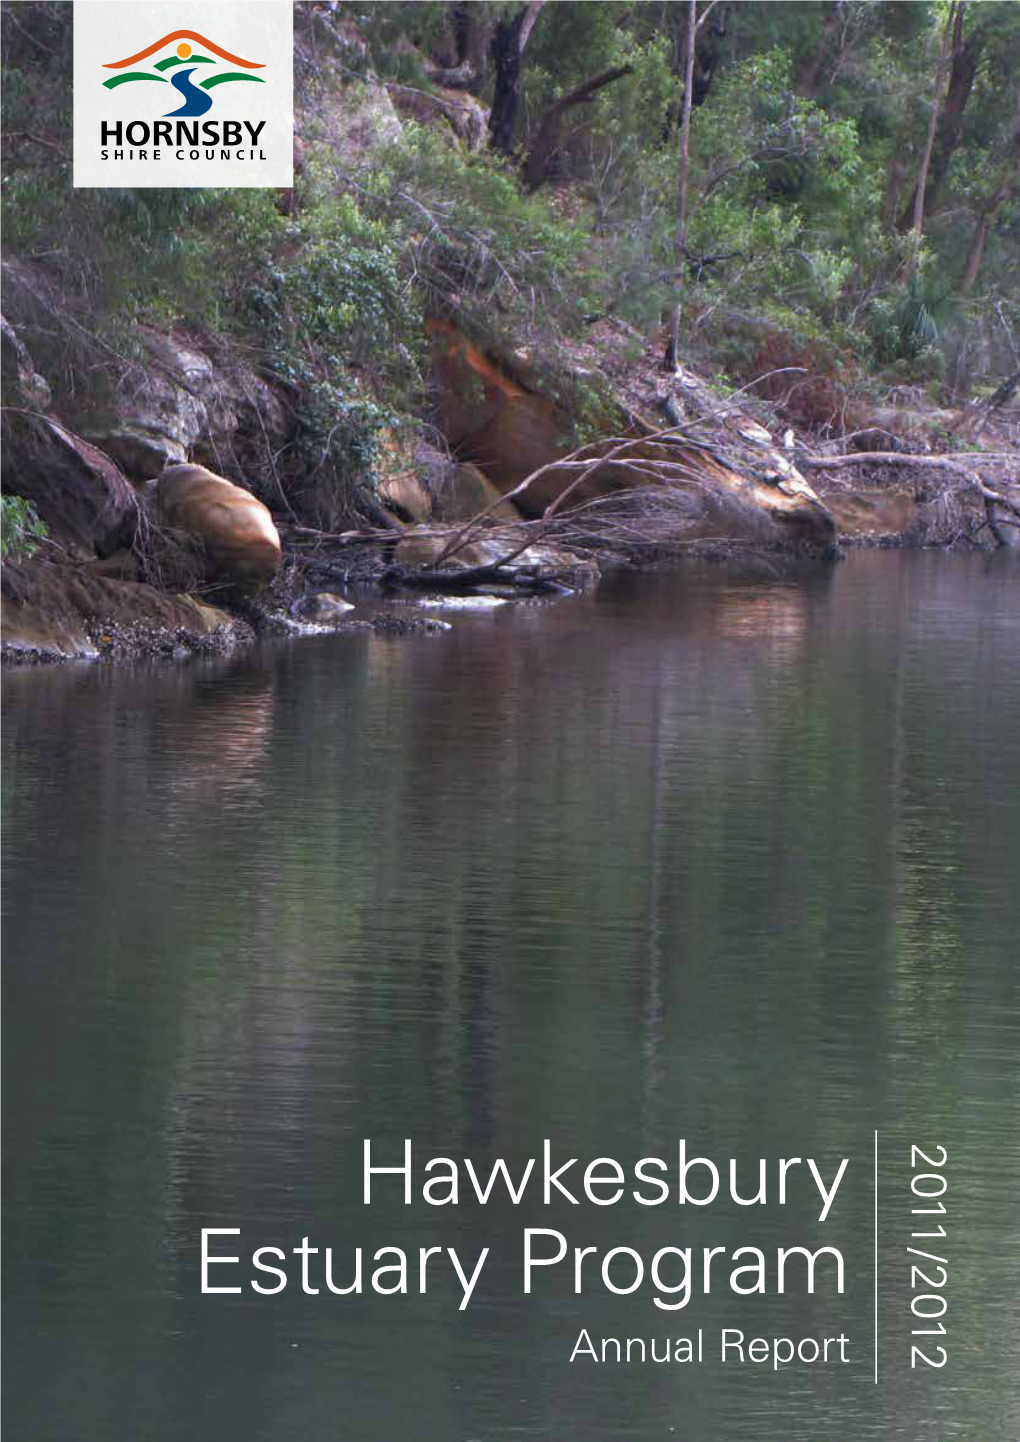 Hawkesbury Estuary Program 2011-2012 Annual Report Was Produced by Dr Peter Coad and Kristy Guise